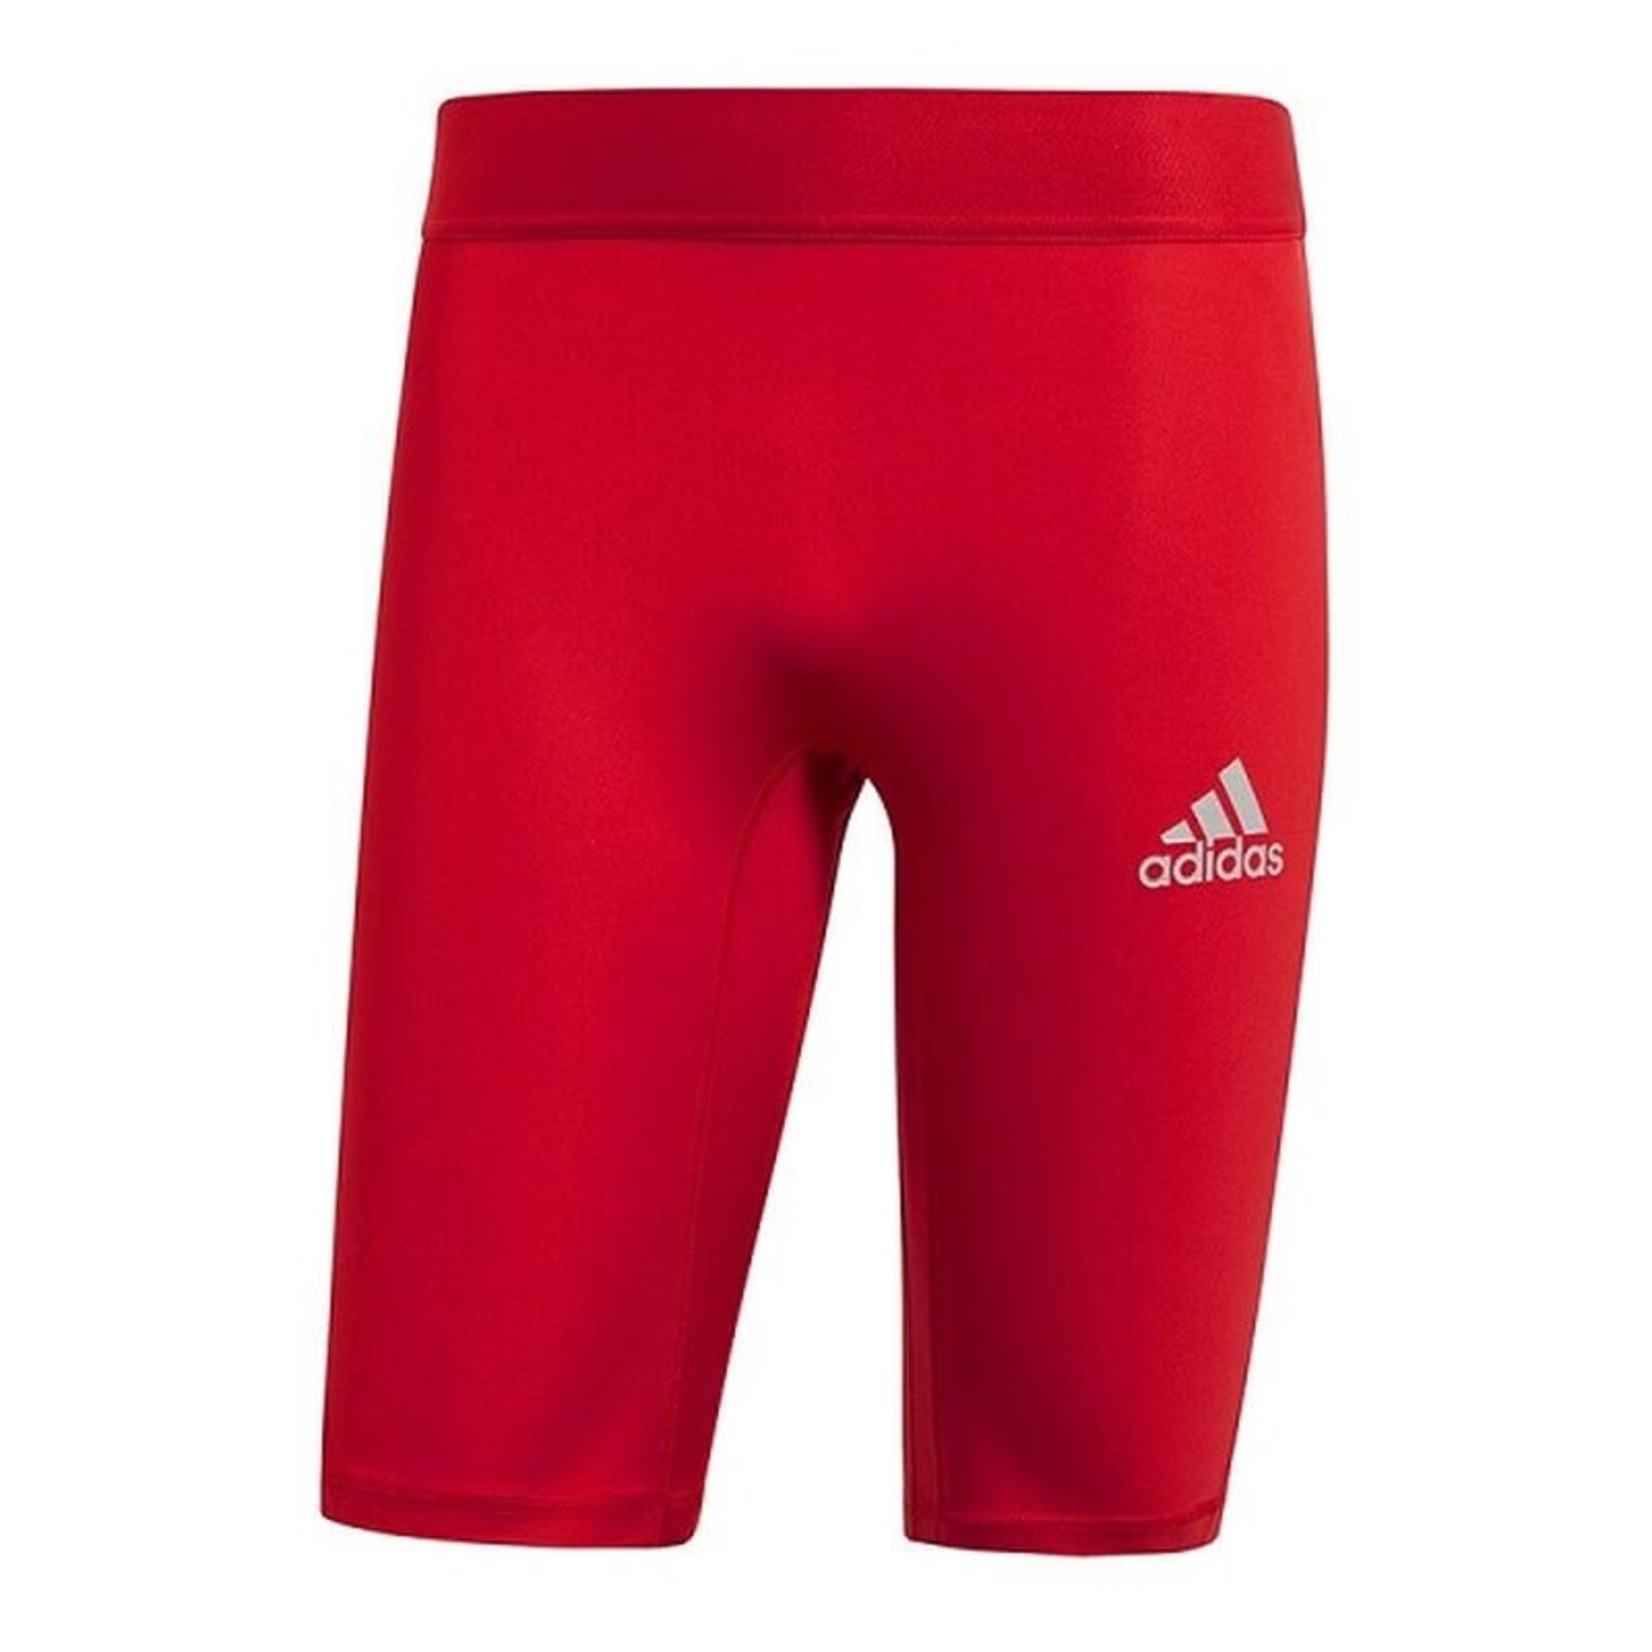 Adidas Compression Red Short Youth